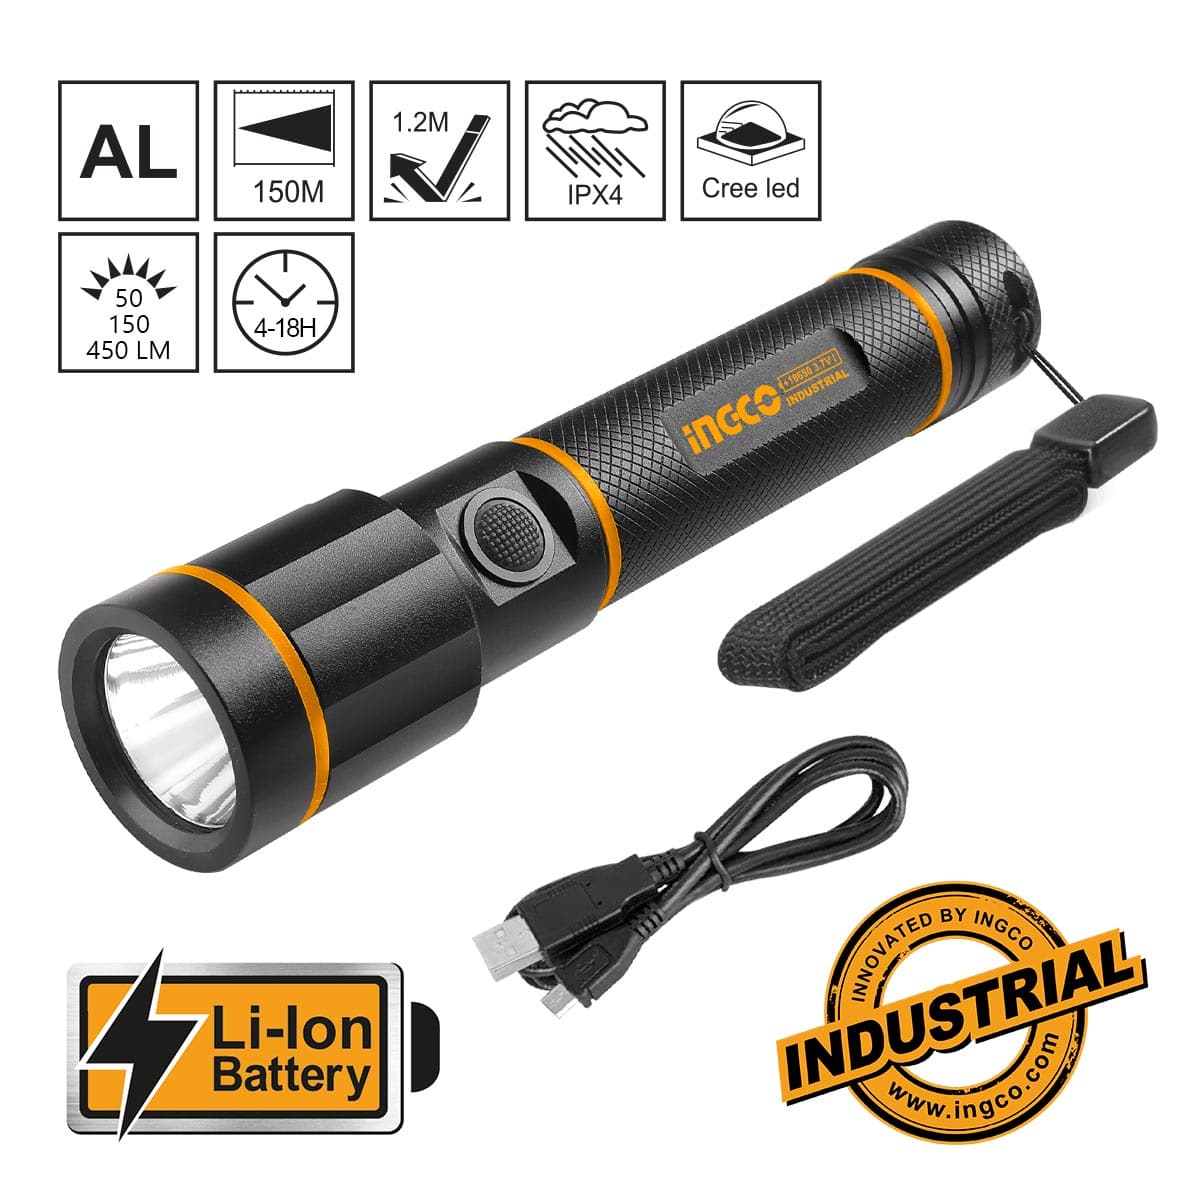 Ingco Waterproof LED Flashlight - HFL013AAA1 | Supply Master | Accra, Ghana Specialty Safety Equipment Buy Tools hardware Building materials